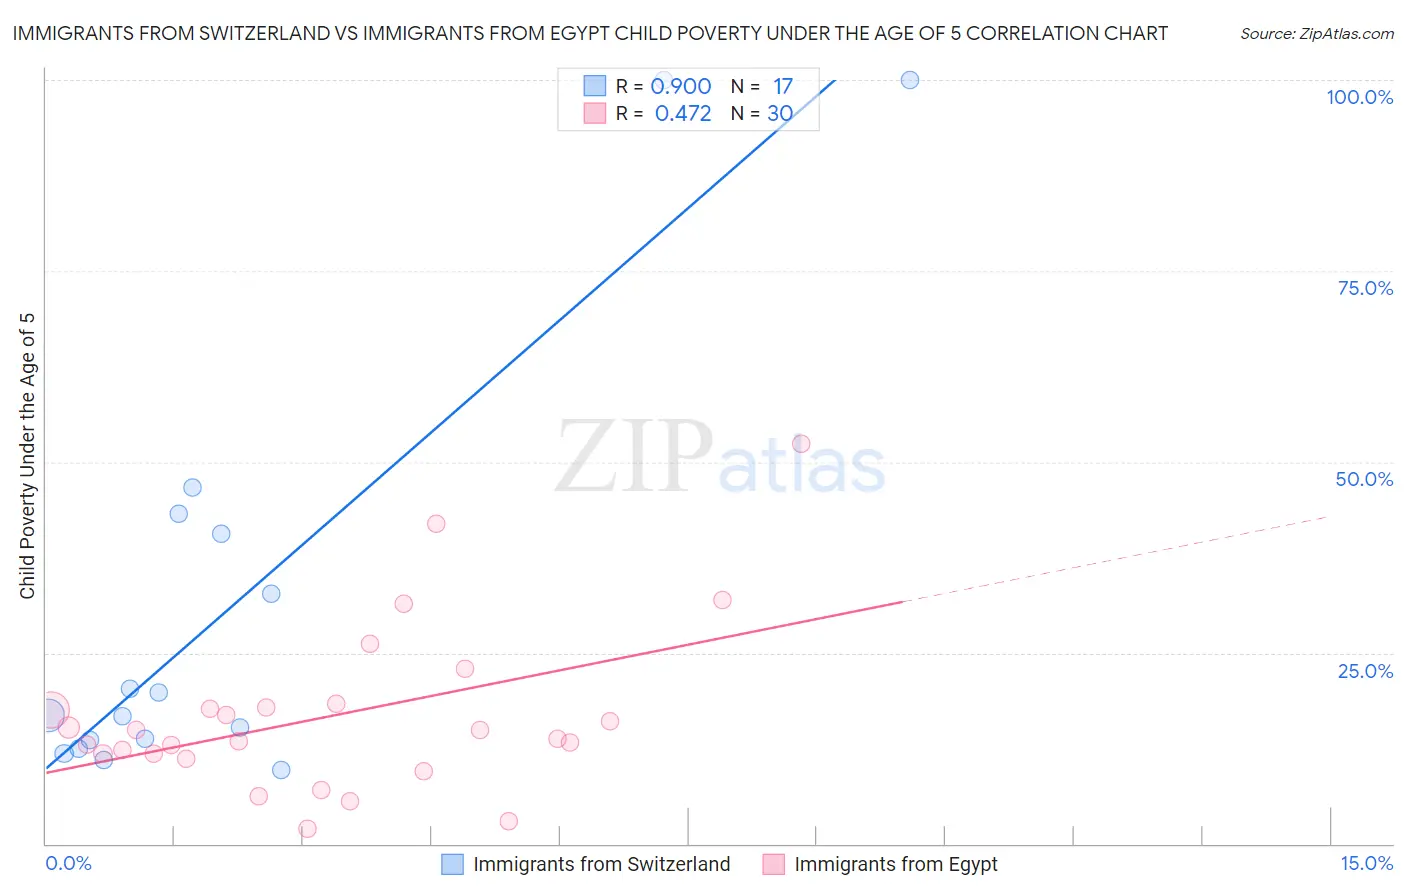 Immigrants from Switzerland vs Immigrants from Egypt Child Poverty Under the Age of 5